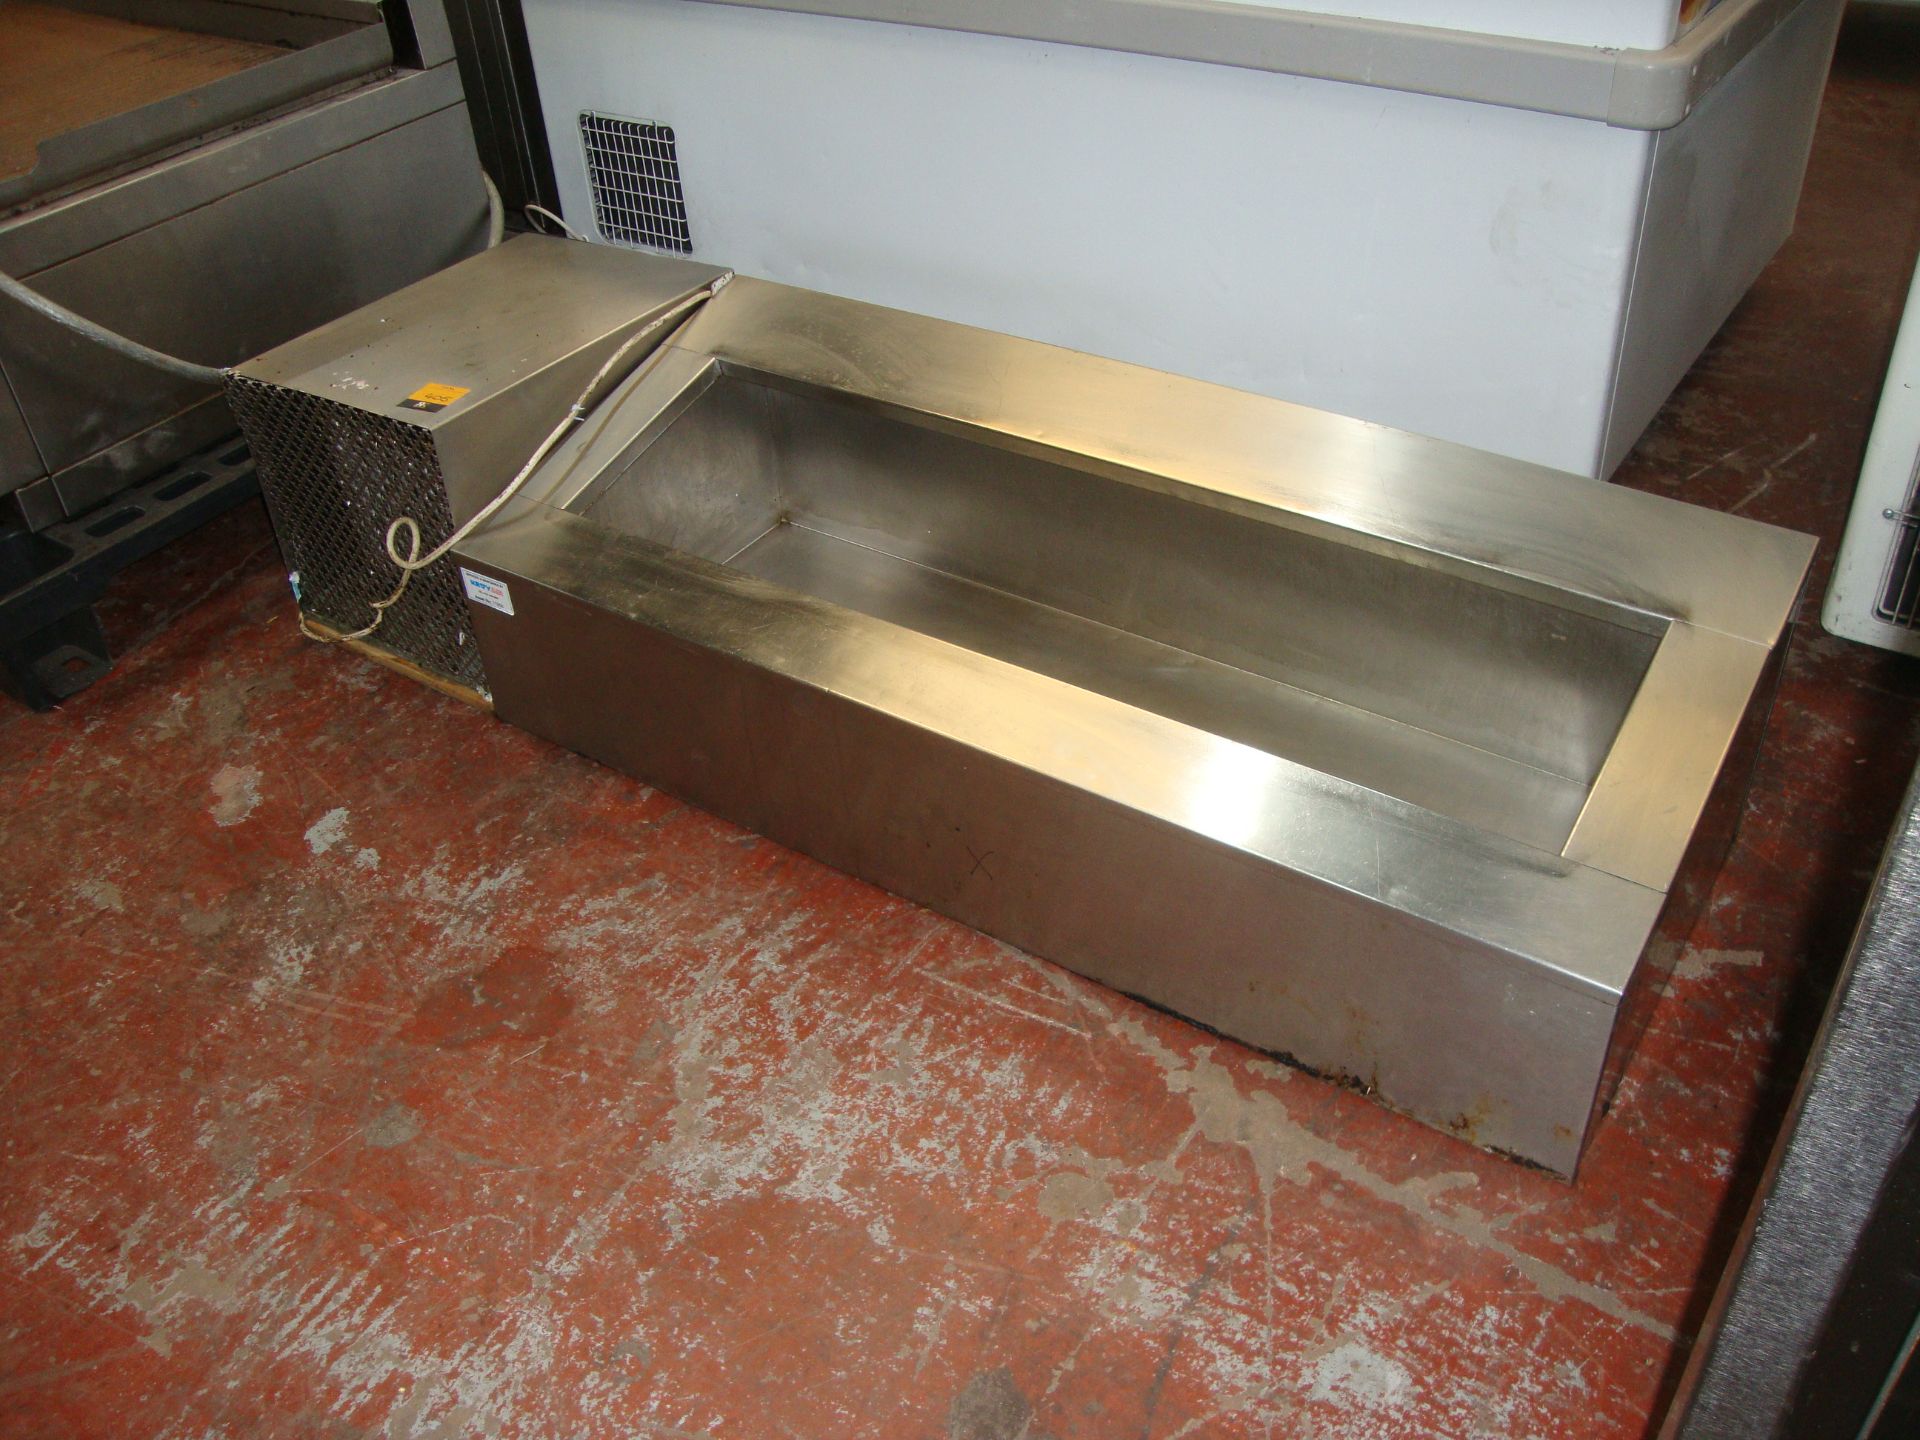 Refrigerated salad dispensing unit in stainless steelIMPORTANT: Please remember goods successfully